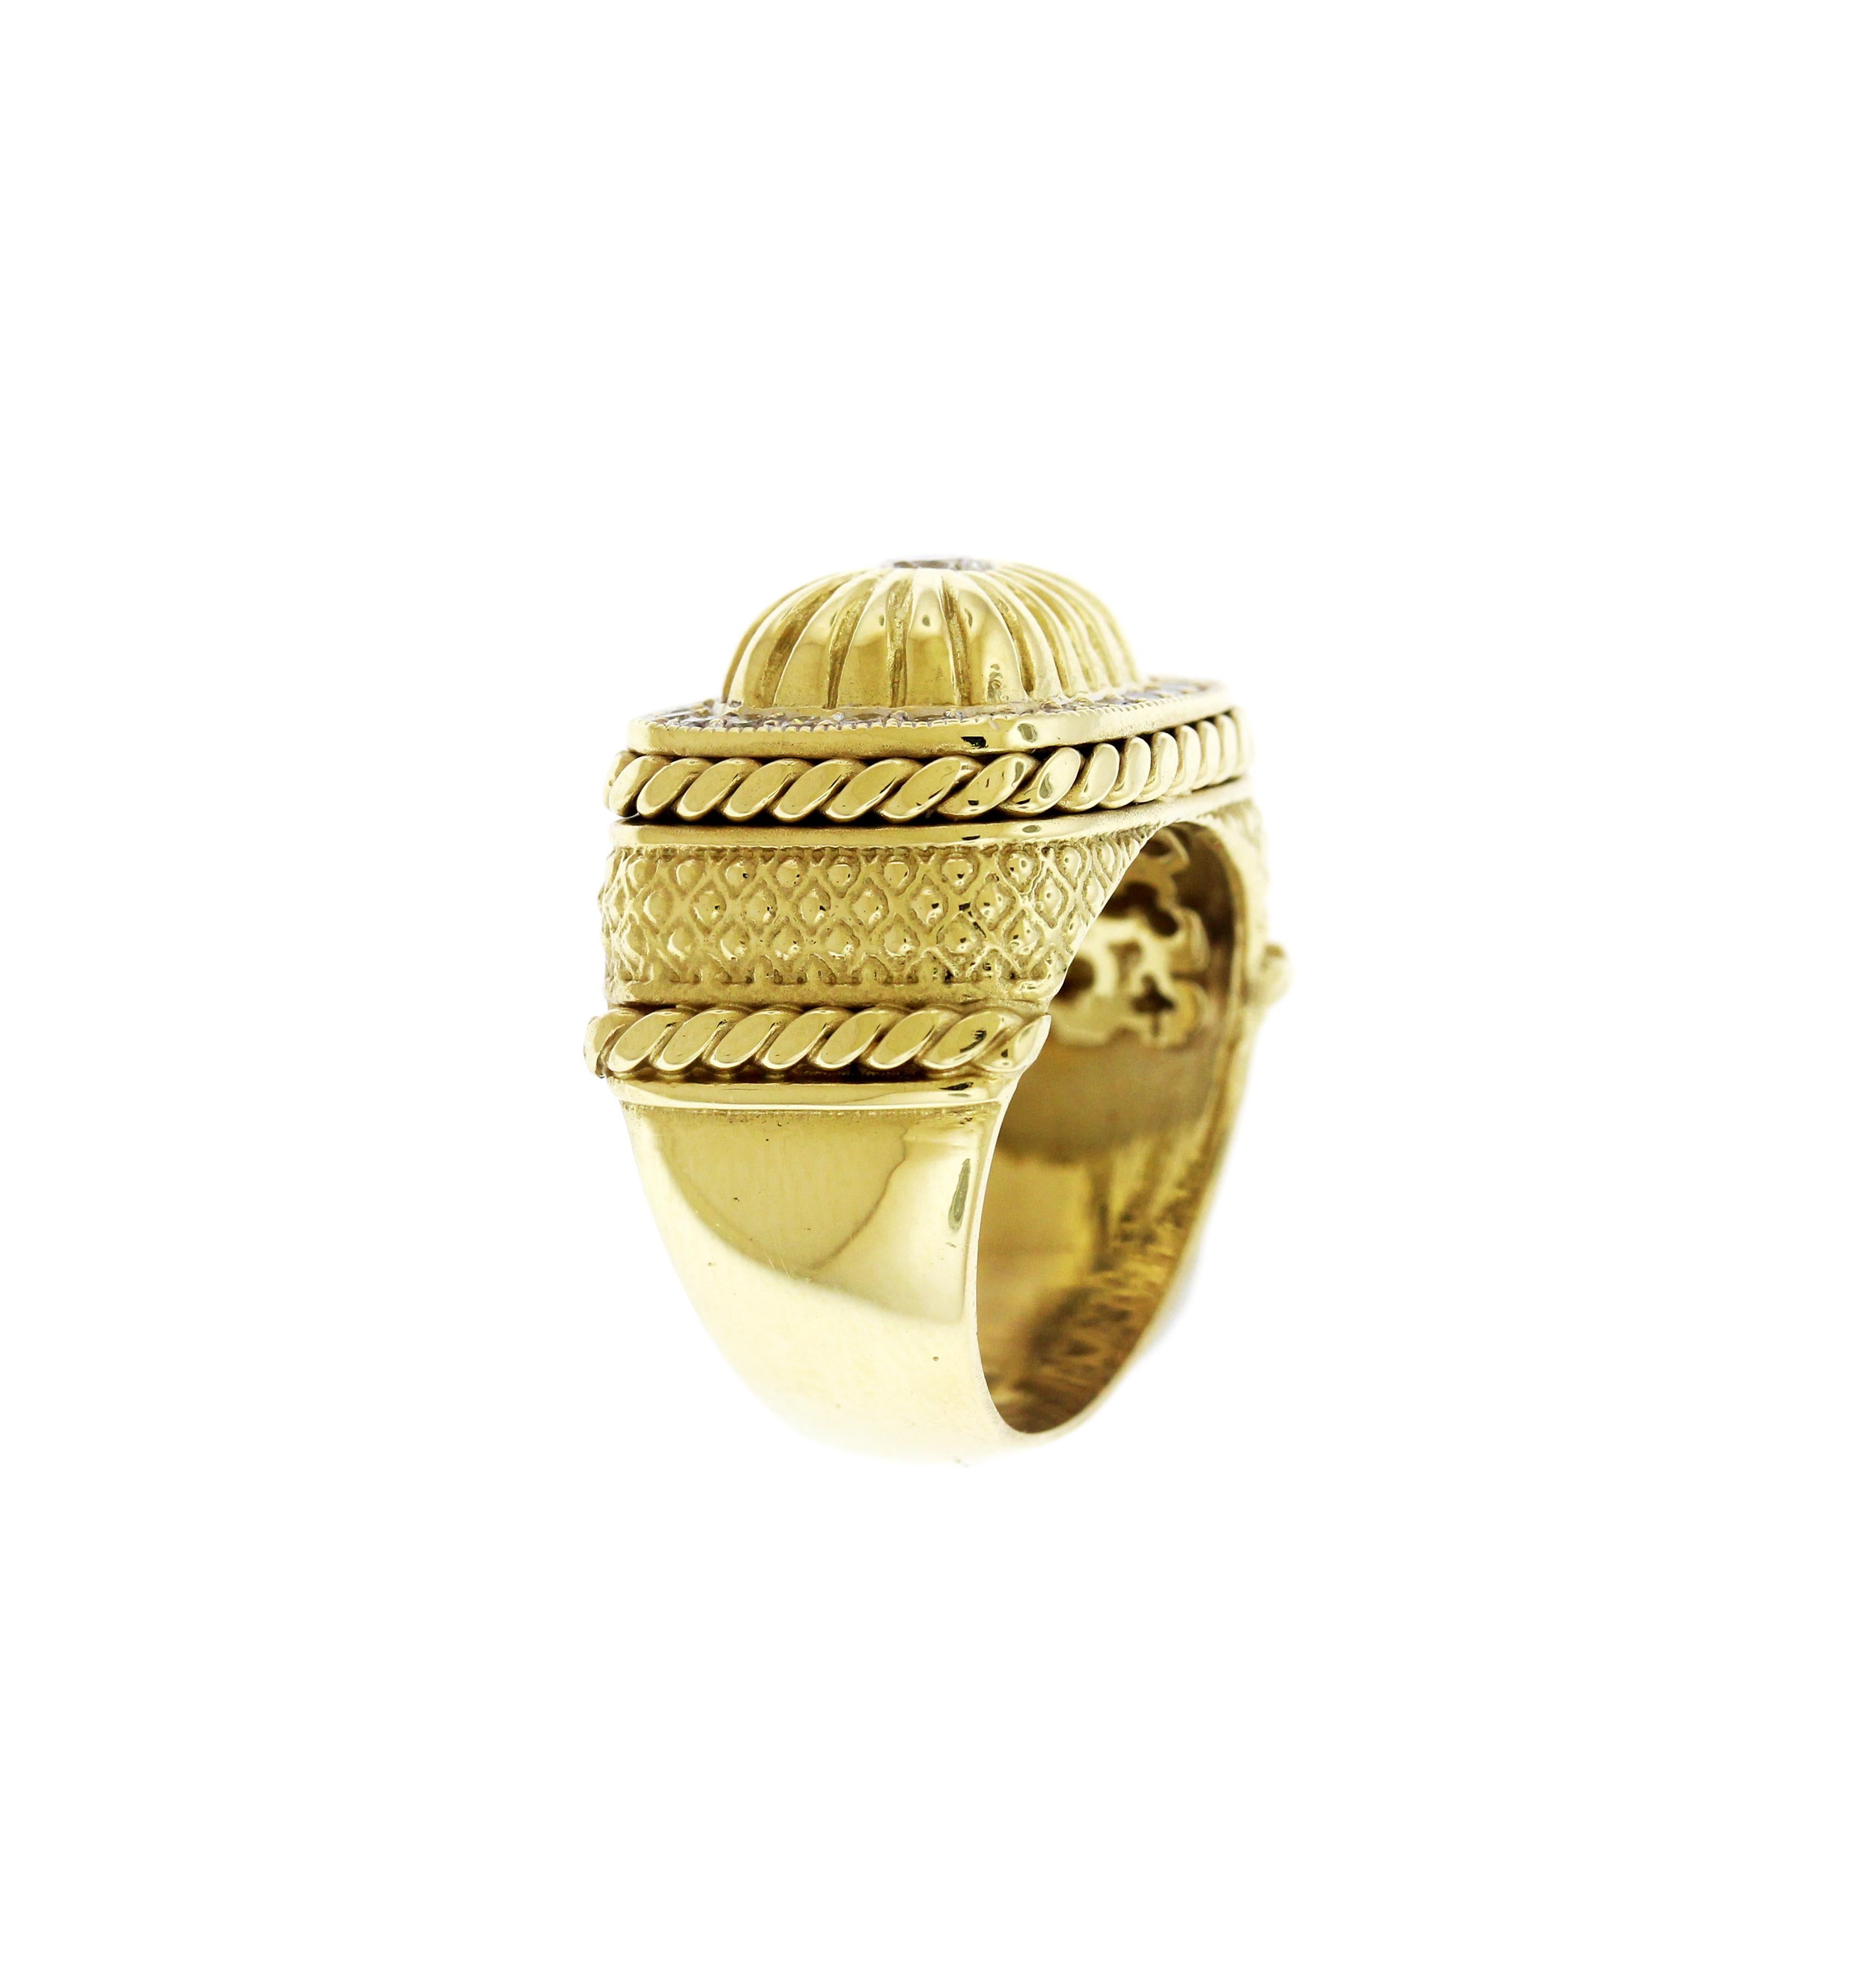 Stambolian 18K Yellow Gold and White Diamond Cocktail Ring

18K yellow gold dome face ring with twist and quilted design, surrounded by white diamonds.

0.47 carat G color, VS clarity diamonds

Ring face is 0.7 in. x 0.6 in., 0.5 band width

Size 6,